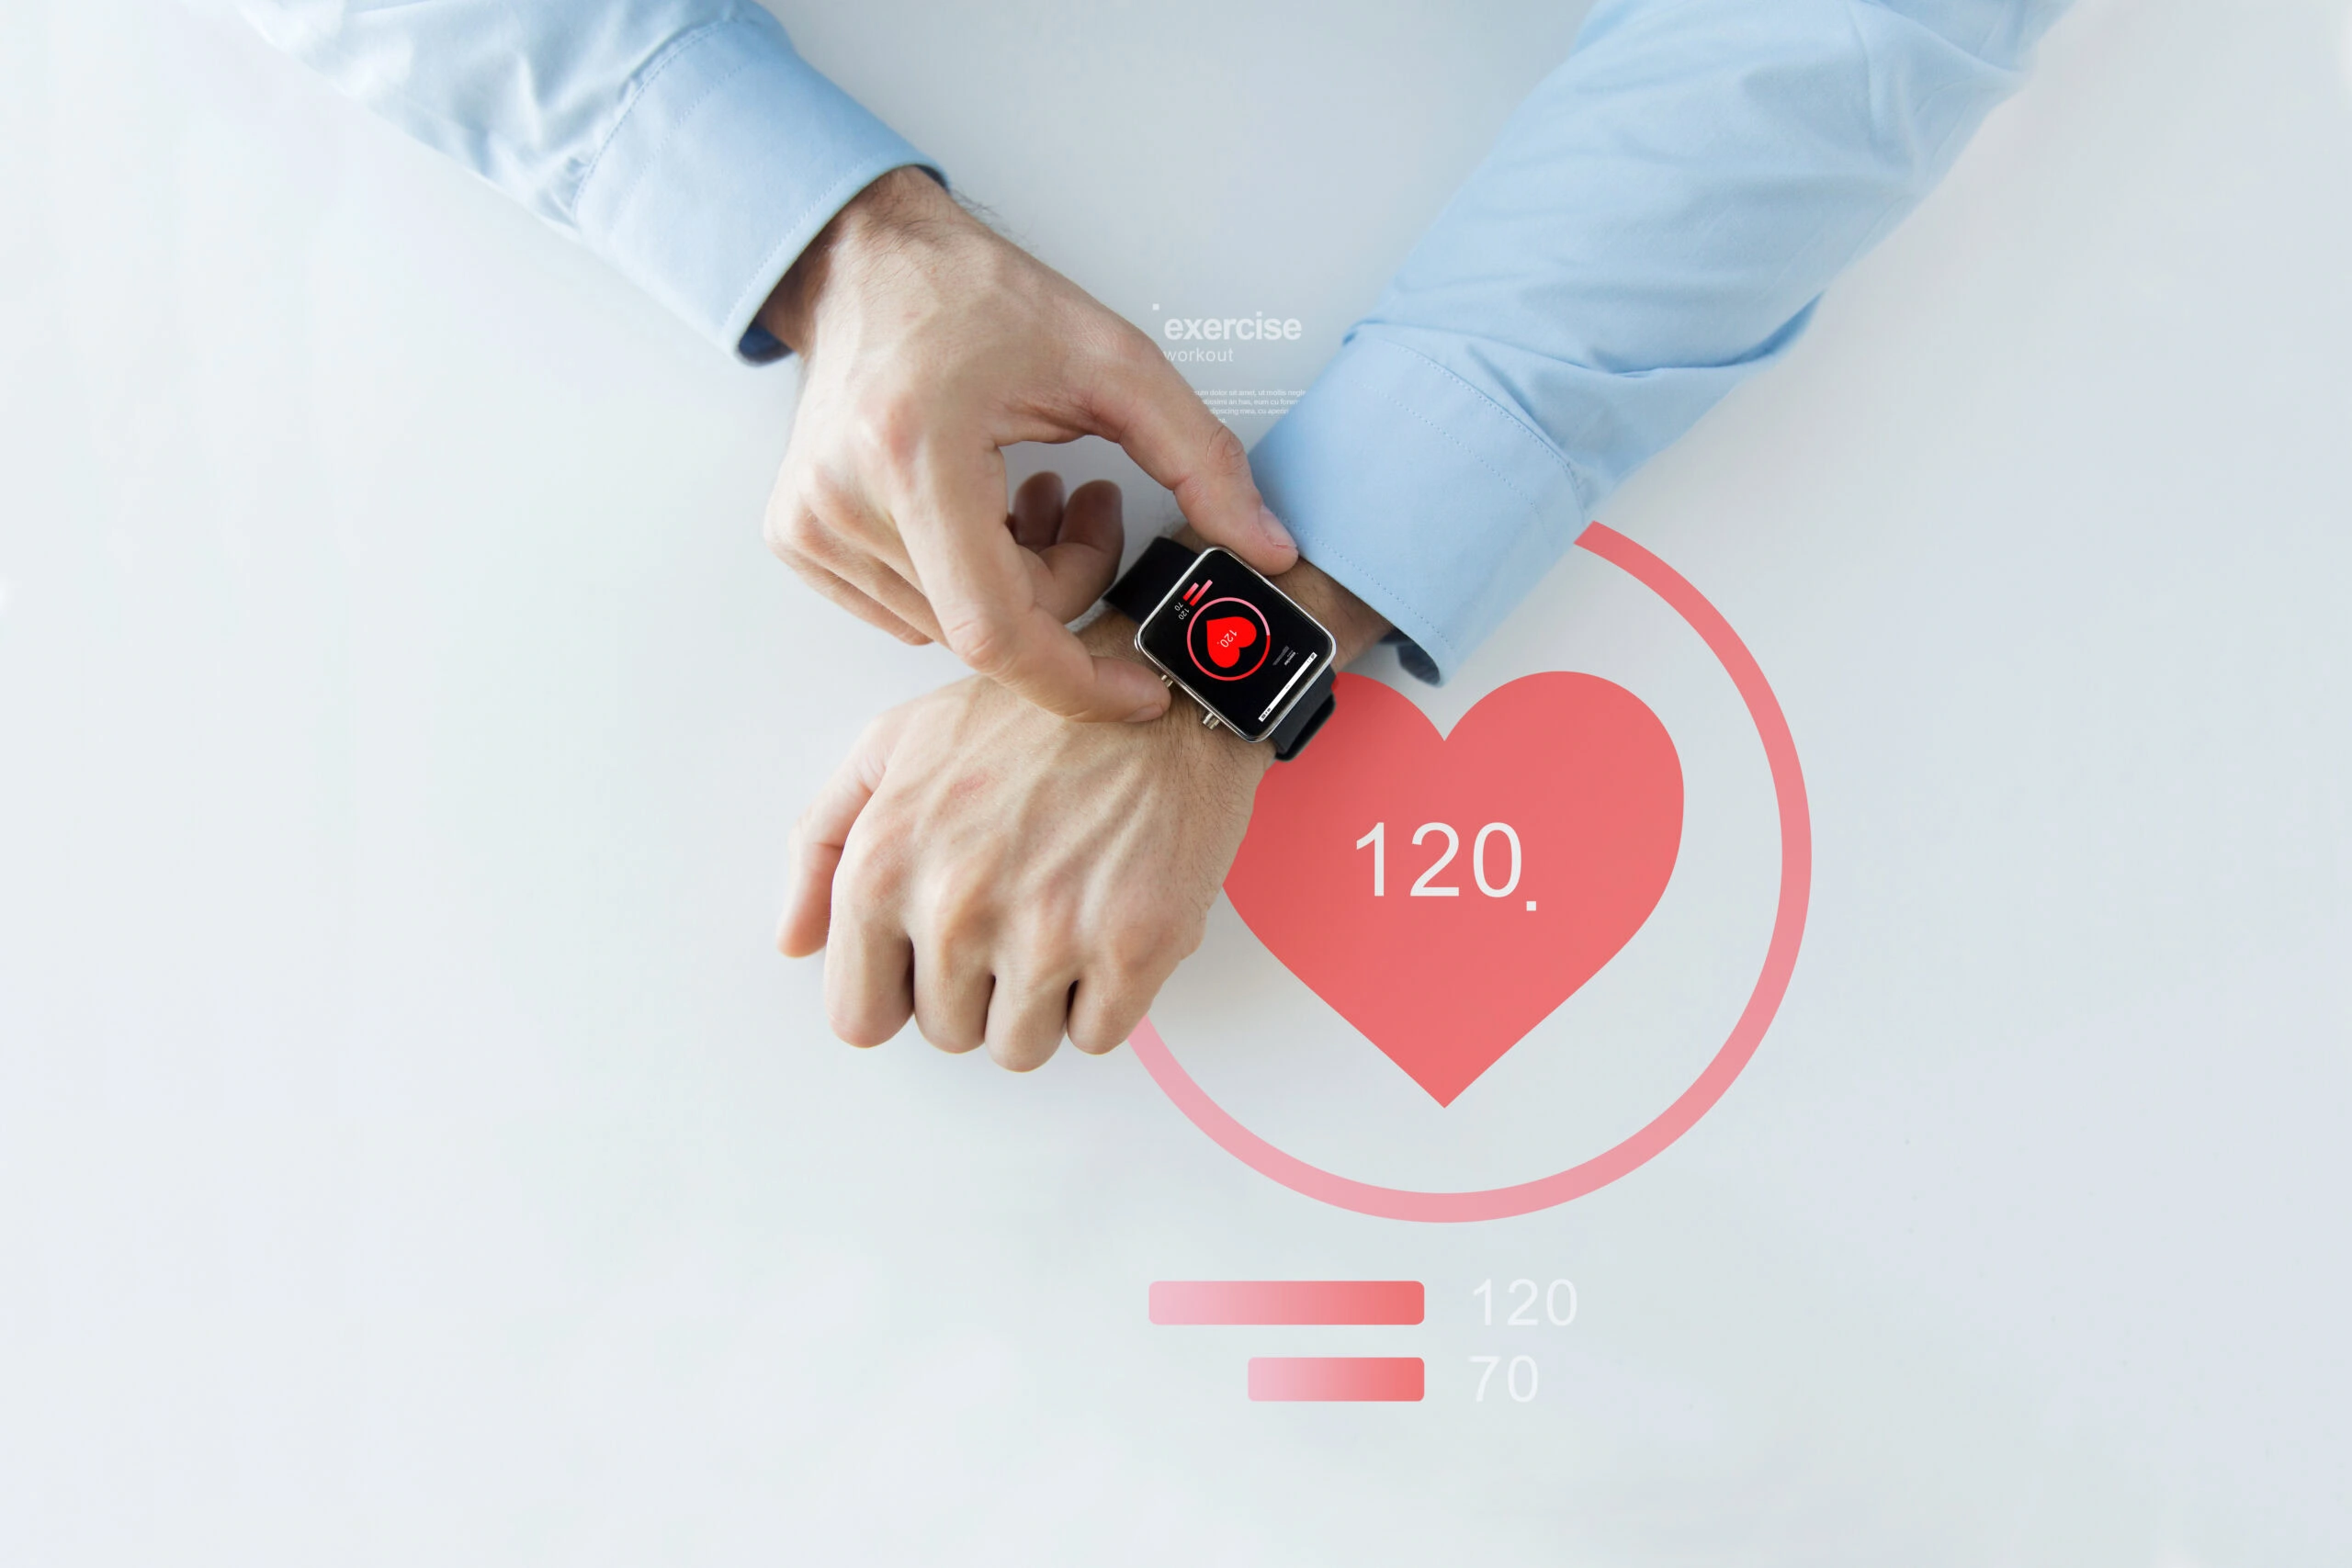 Road to Market for Wearable Medical Devices